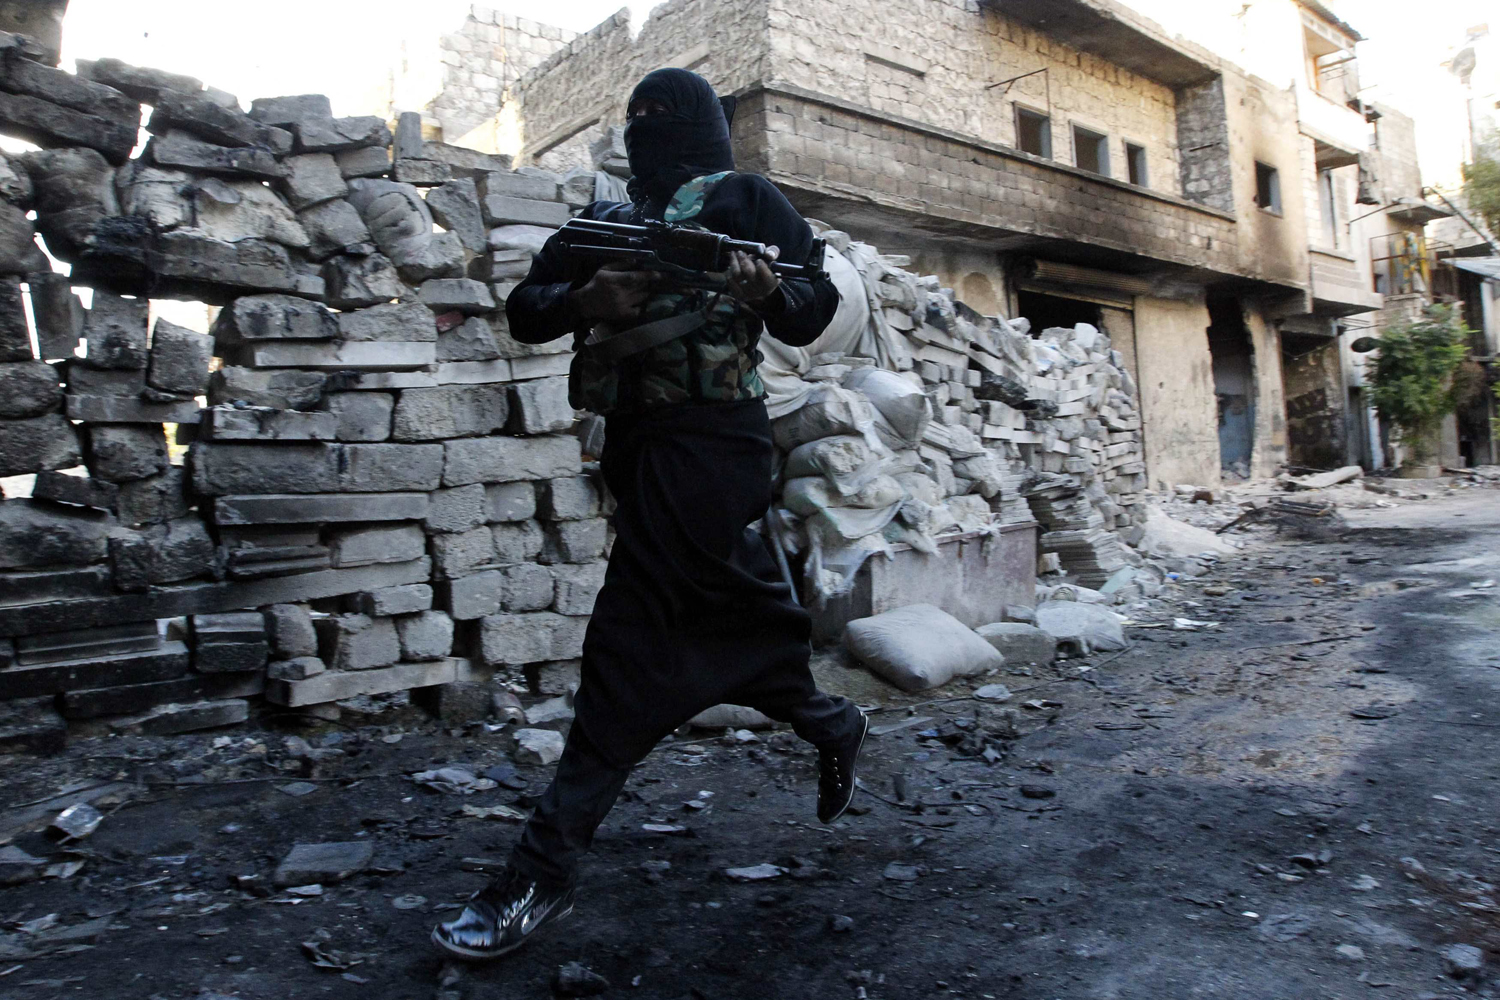 Oct. 3, 2013. Um Radwan, a female fighter in the Free Syrian Army, runs for cover from snipers loyal to the Syrian regime in Aleppo's Bustan al-Basha district.